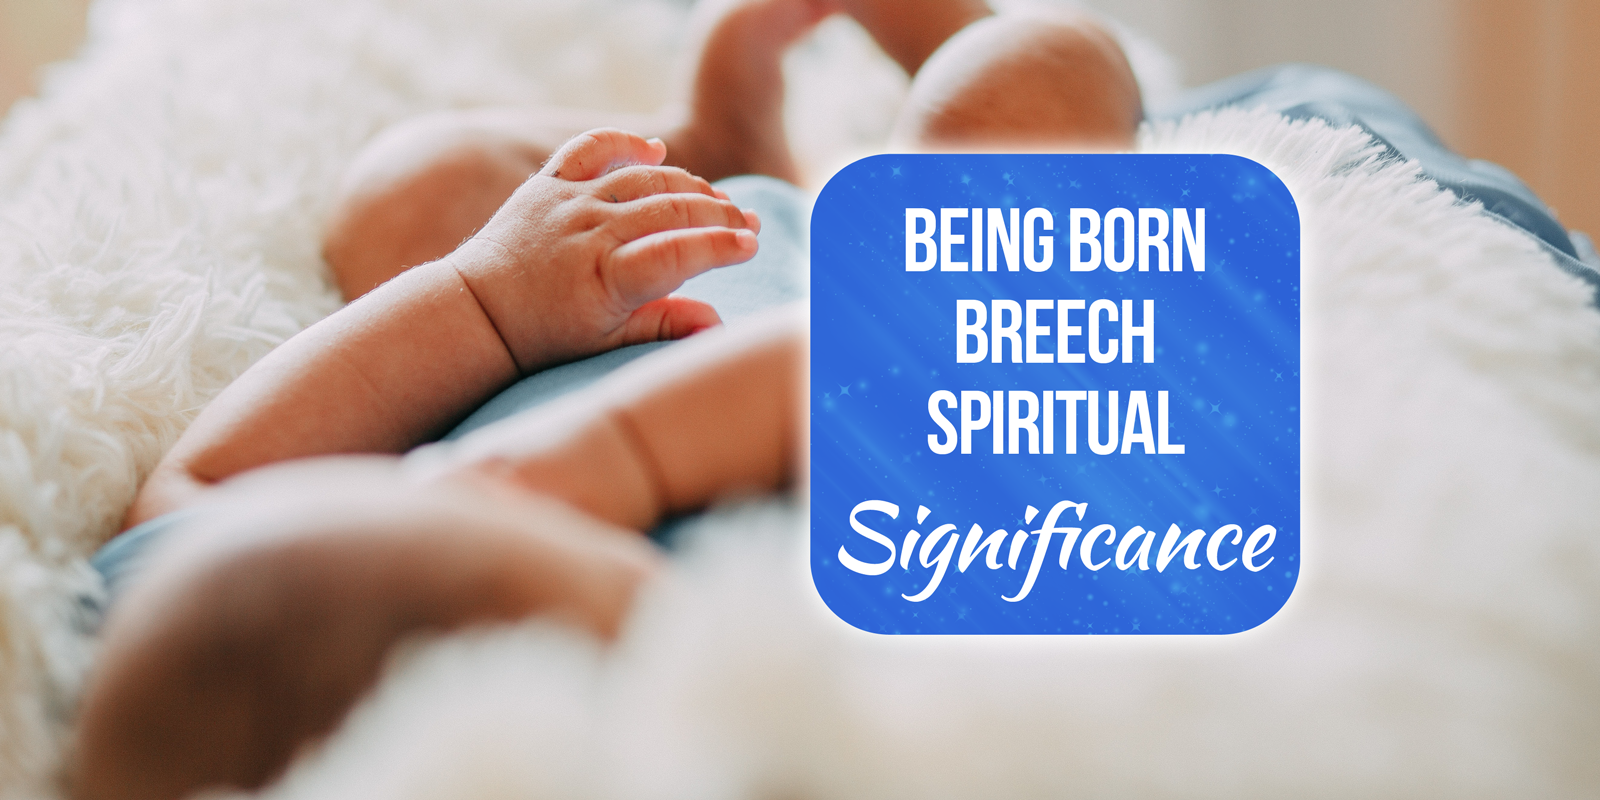 what is the spiritual significance of being born breech